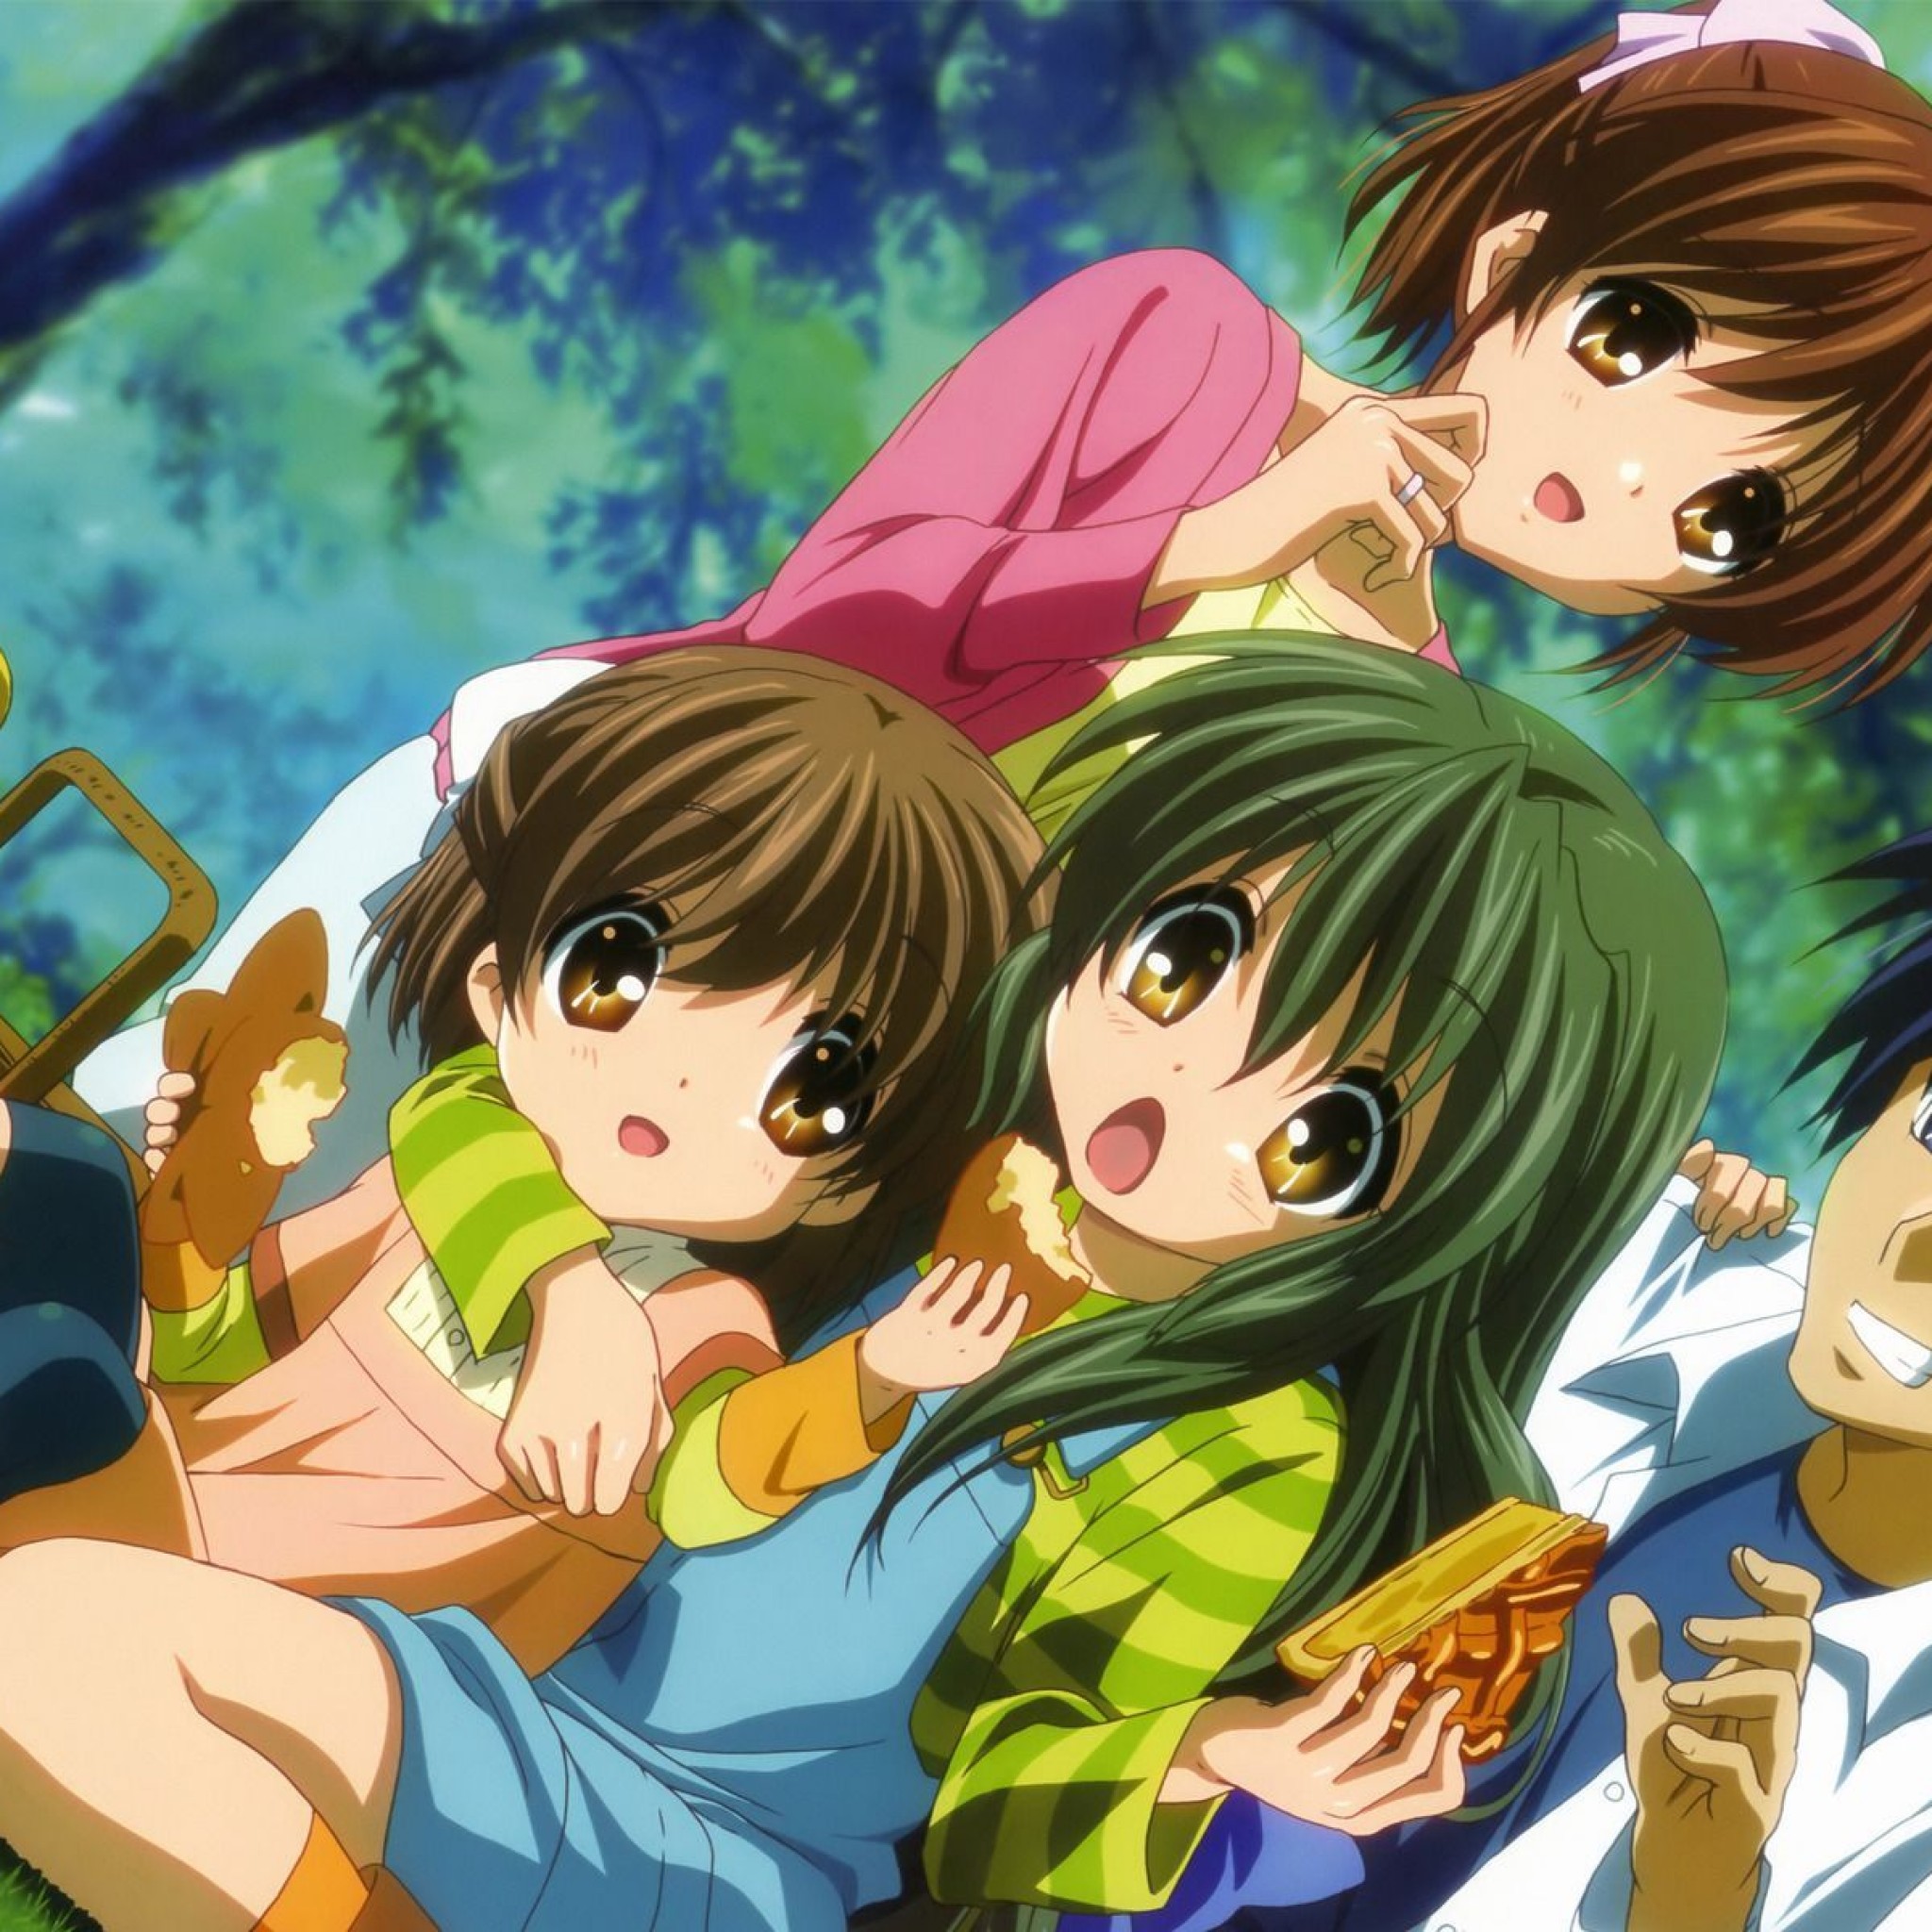 Clannad Wallpaper Anime Wallpapersus Com Ipad タブレット壁紙